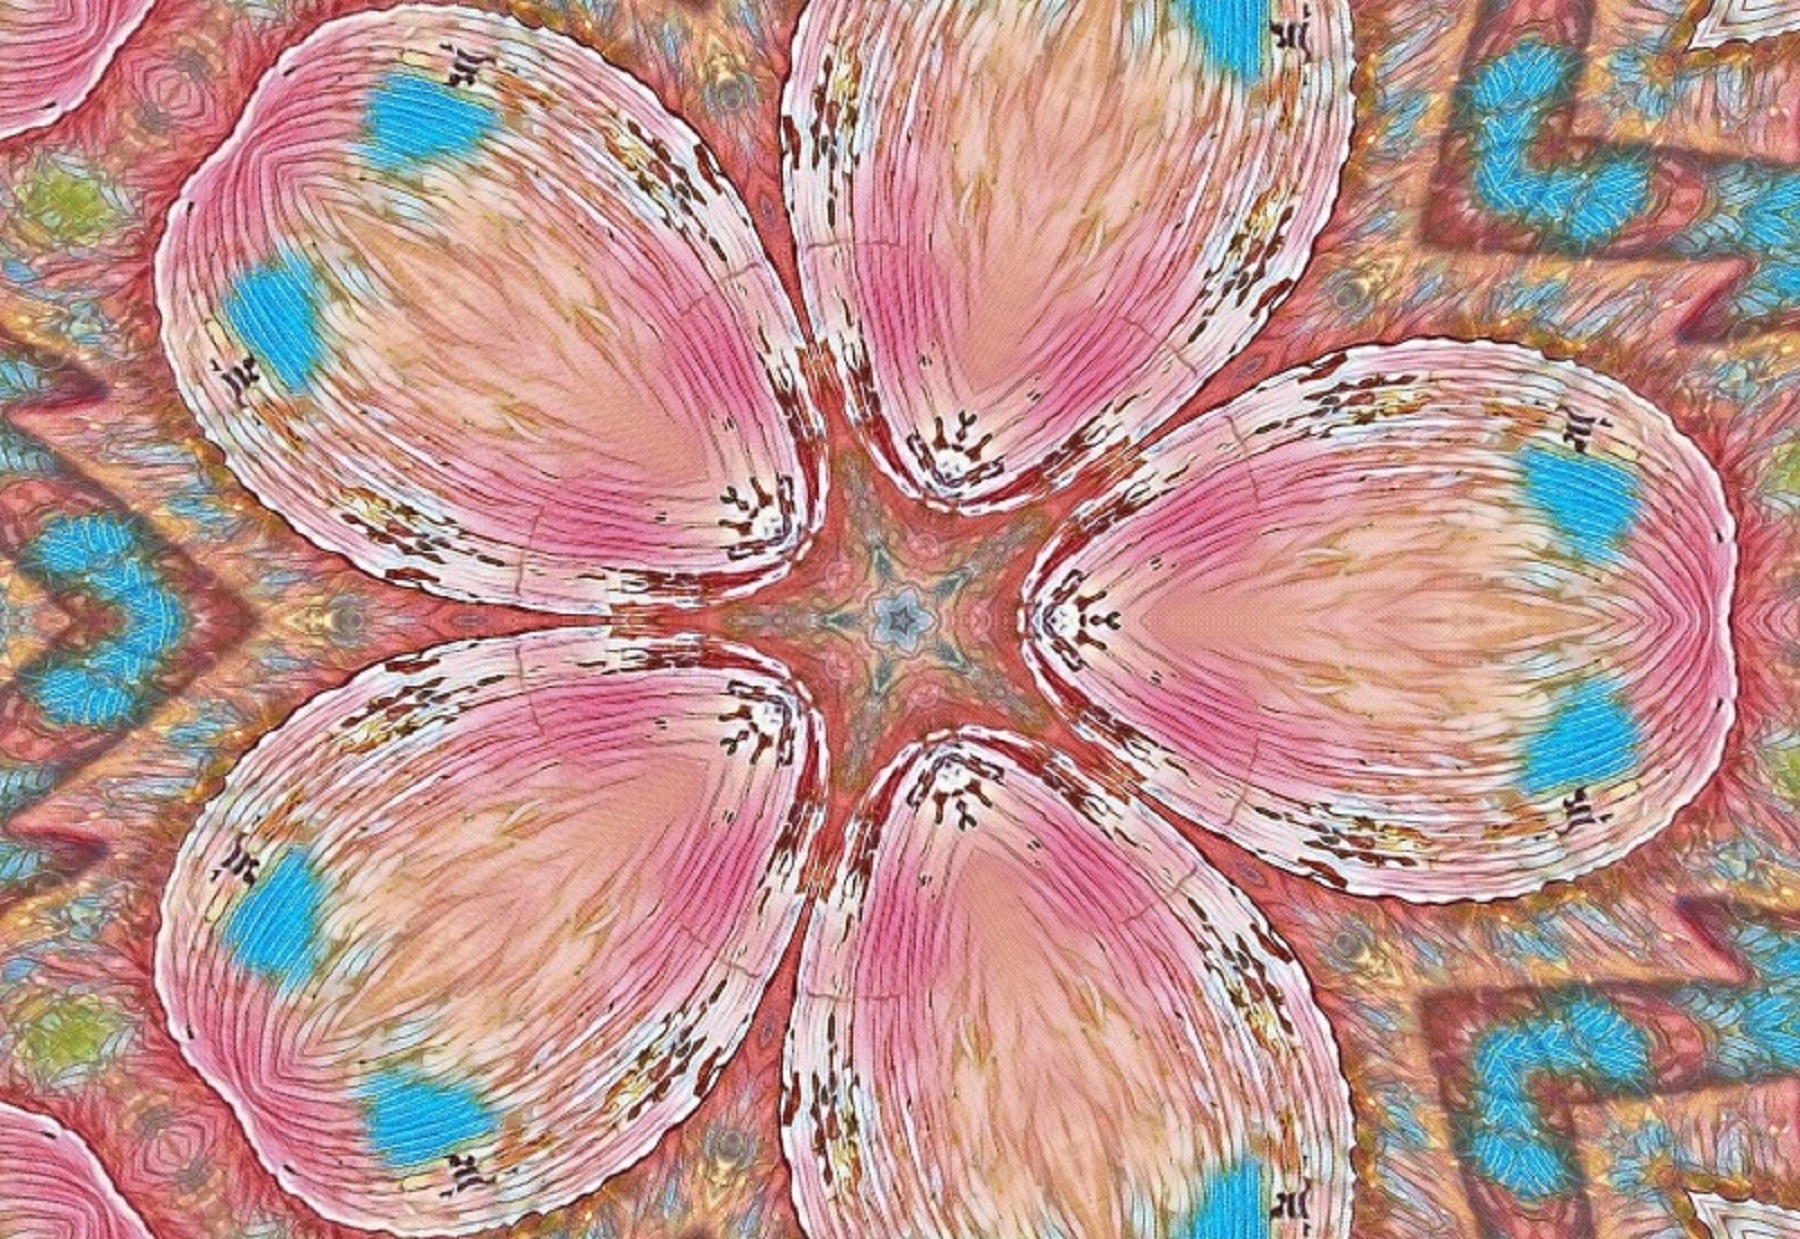 Photo taken by me with Beauty effect and Kaleidoscope x5 on LunaPic.com